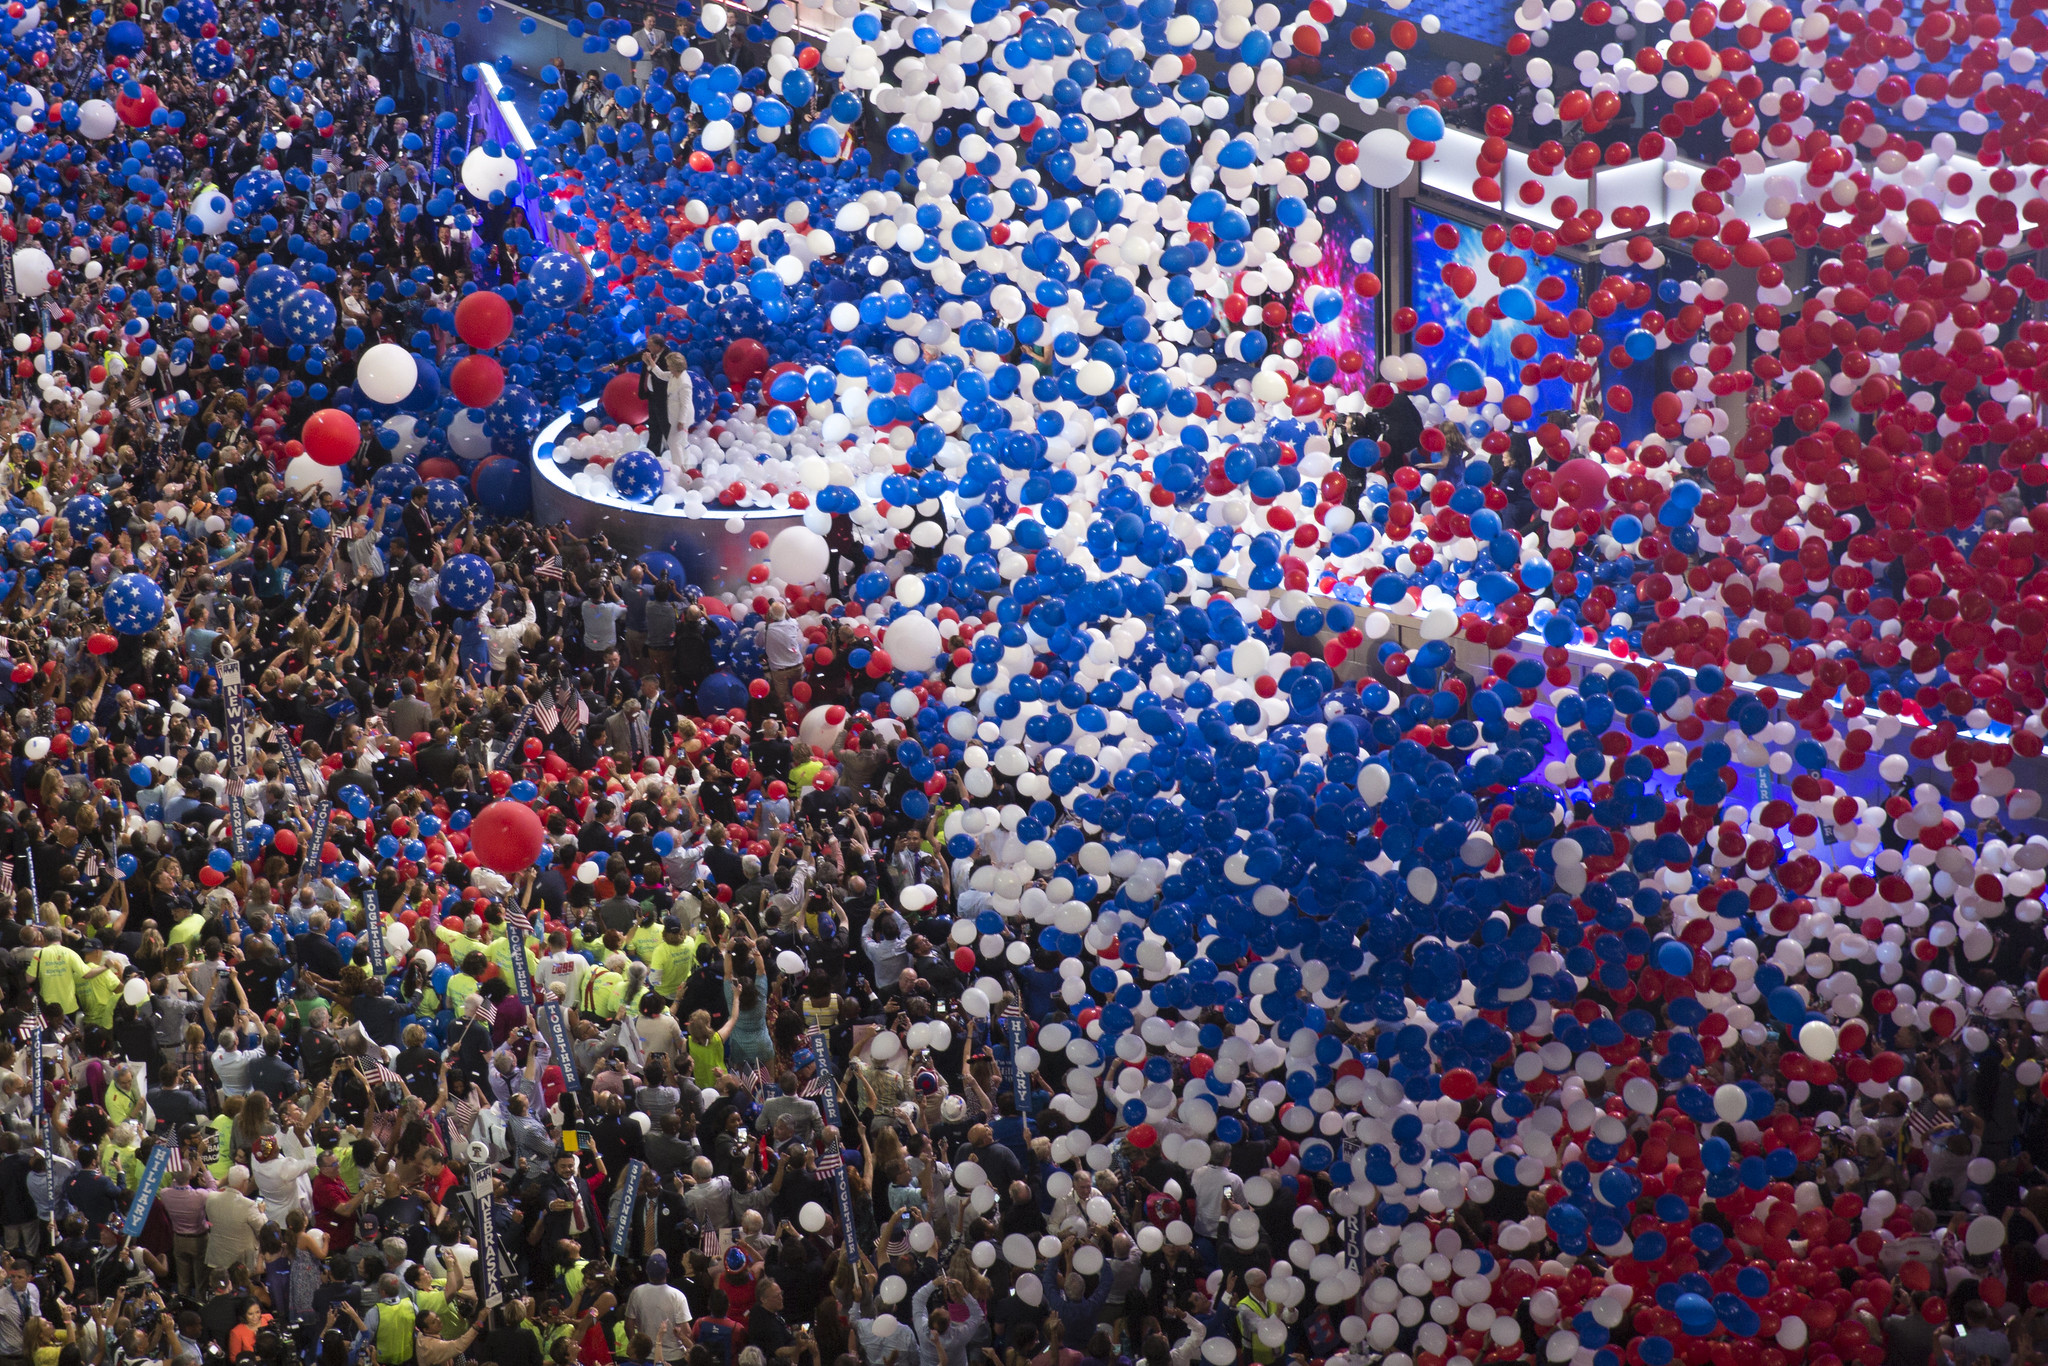 Double Check: Democratic National Convention 2020 - Day 2 Recap